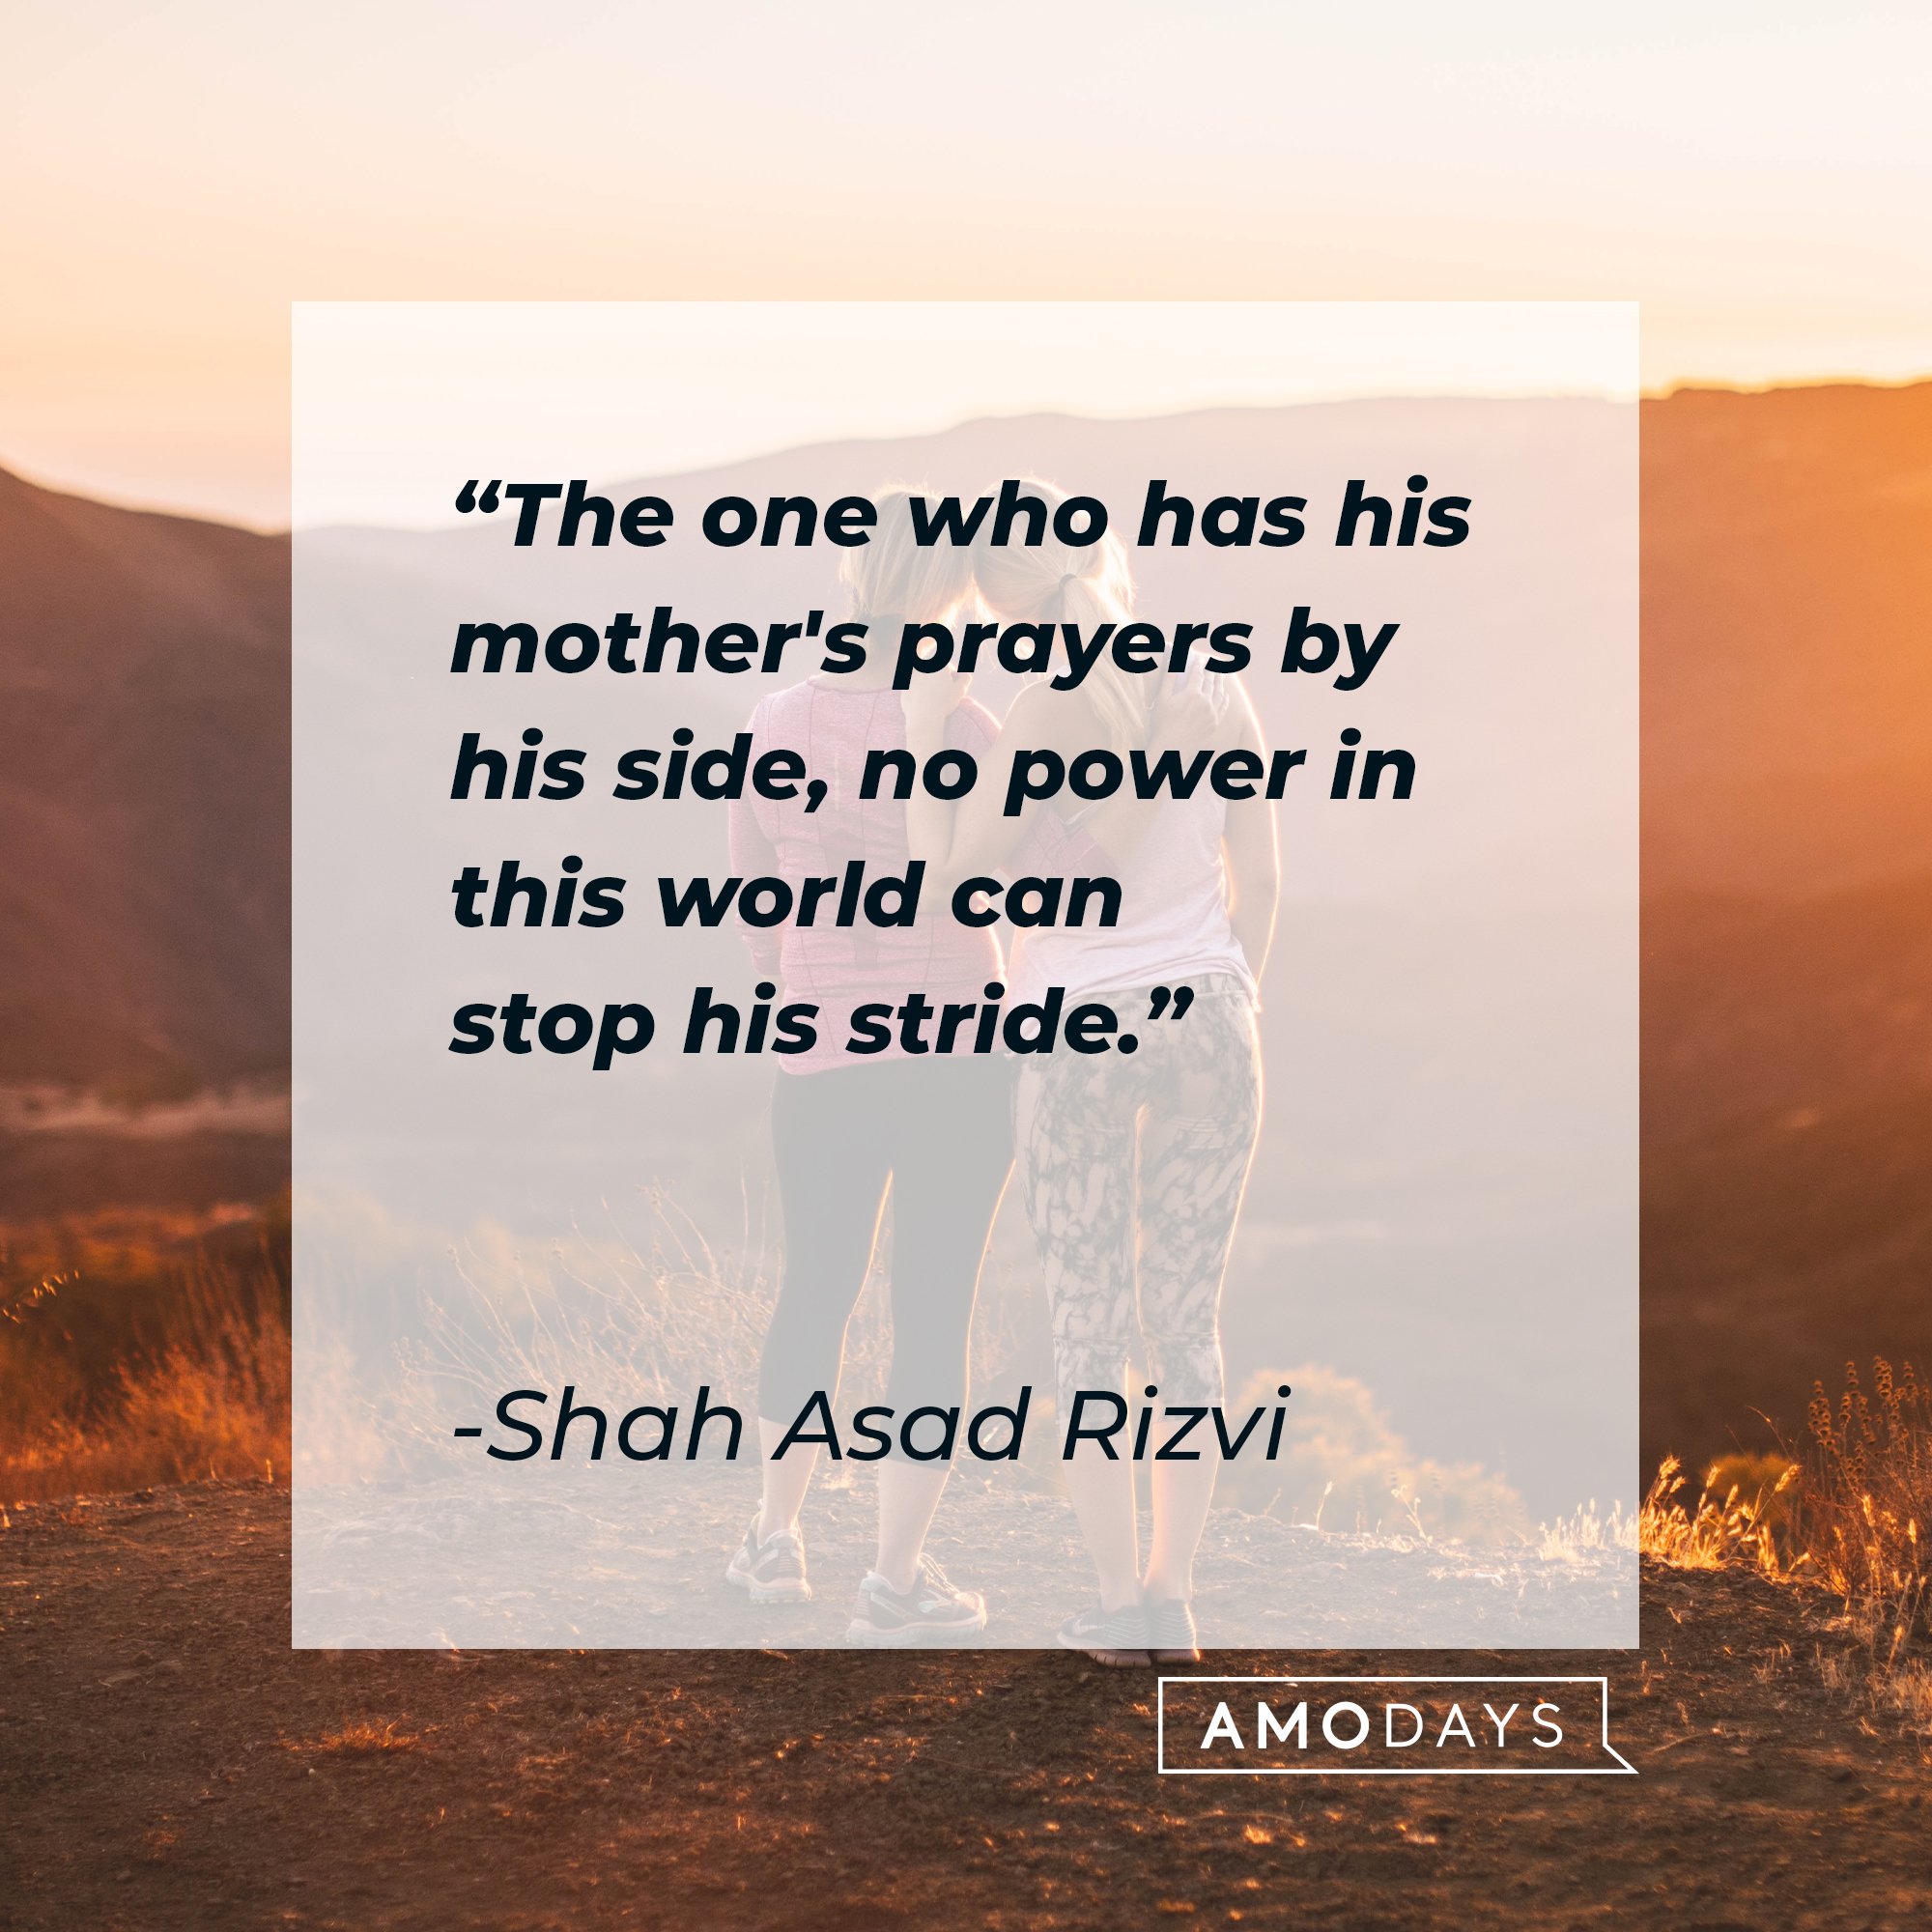 Shah Asad Rizvi's quote: "The one who has his mother's prayers by his side, no power in this world can stop his stride." | Image: AmoDays